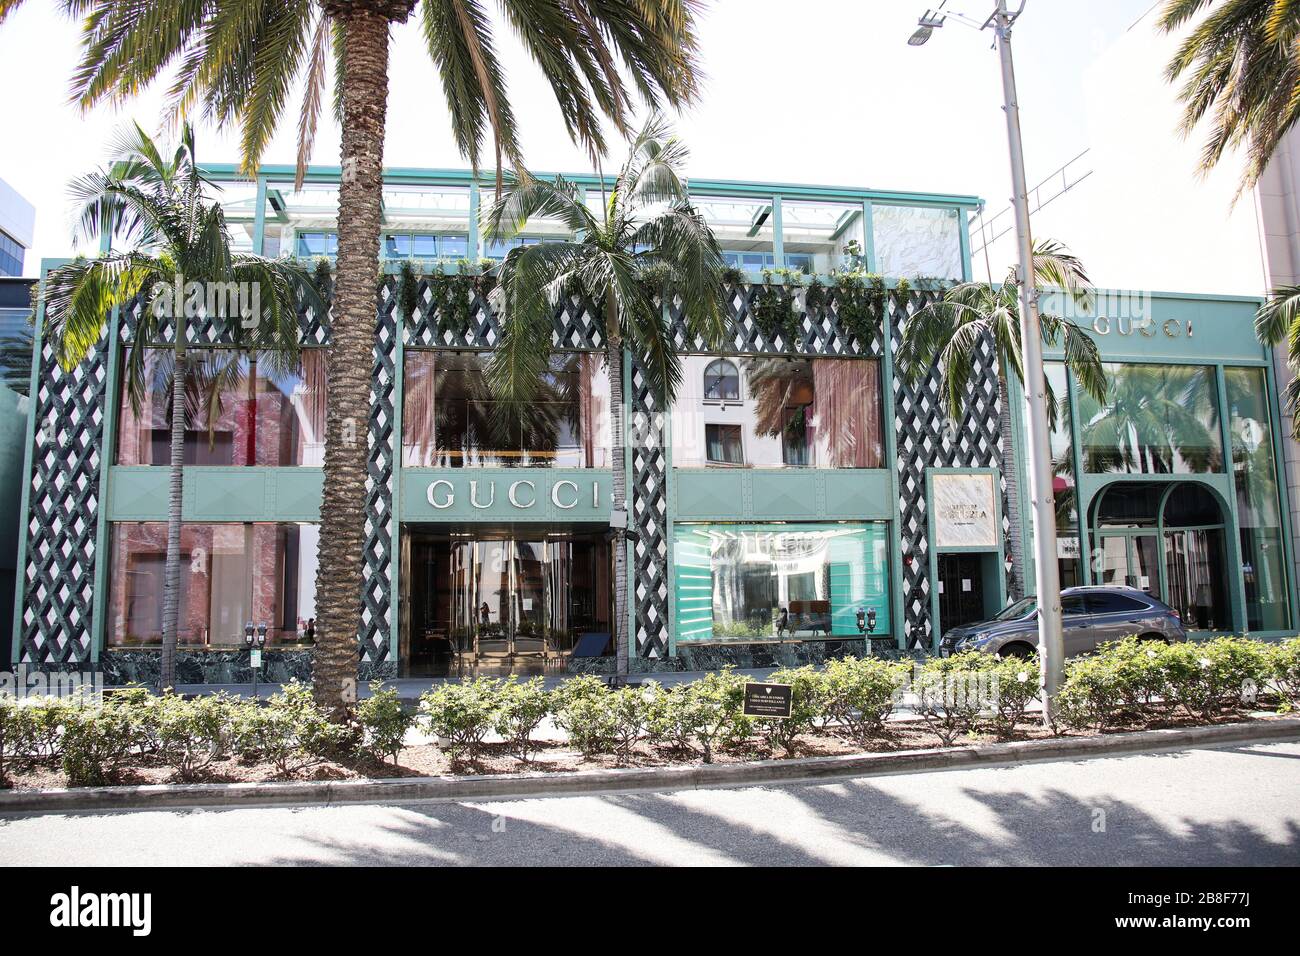 gucci. rodeo drive. beverly hills. 3/2012